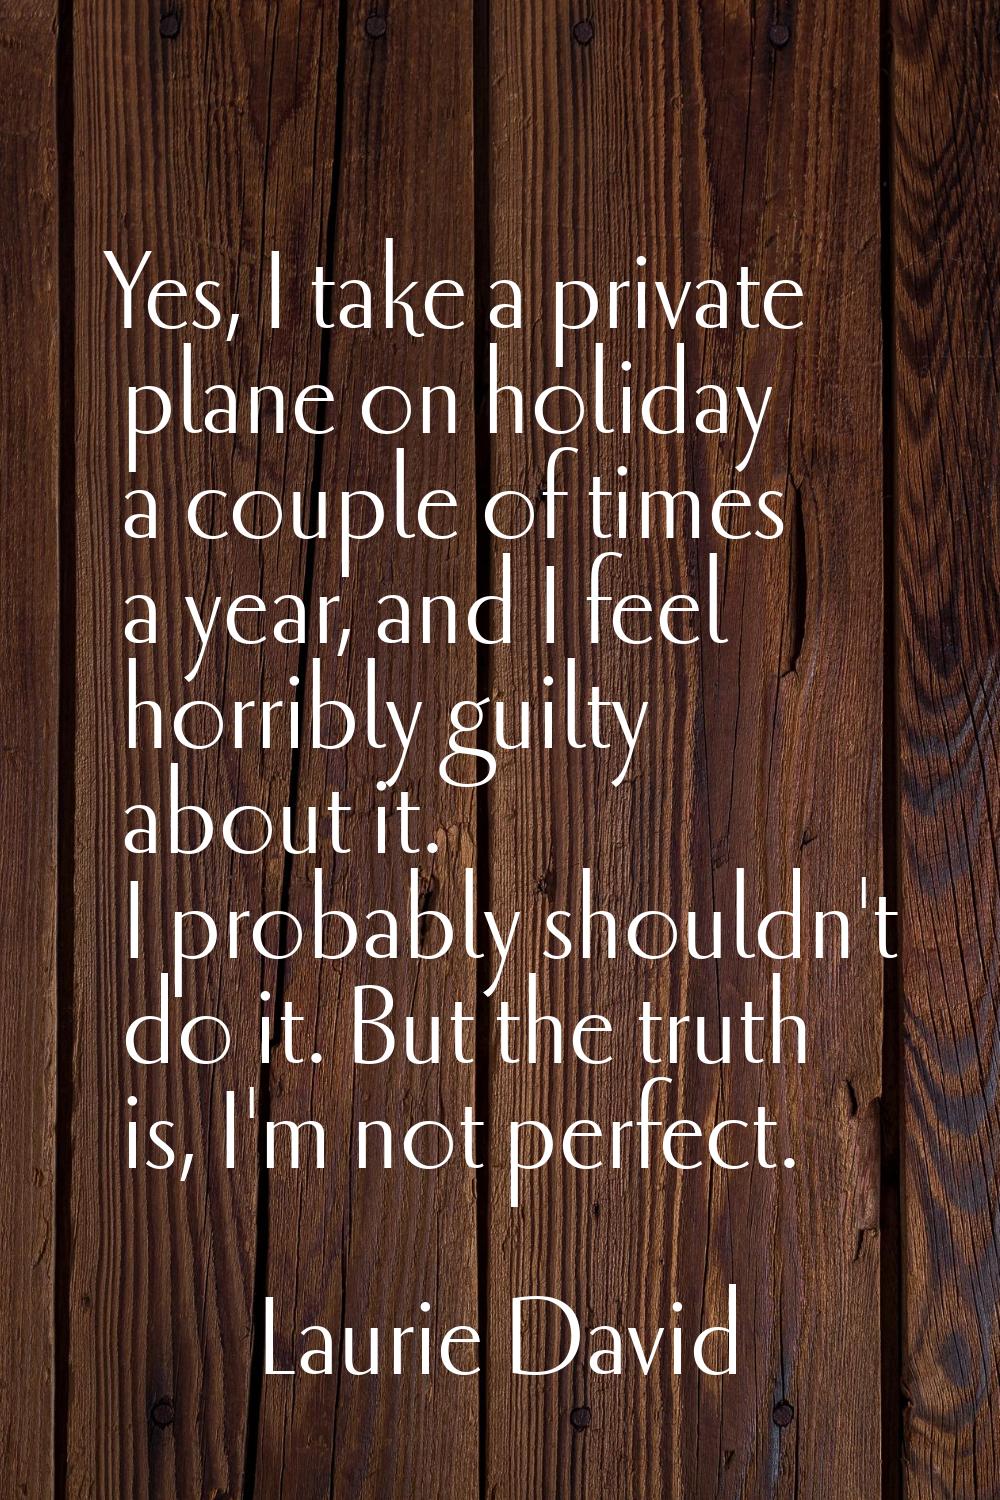 Yes, I take a private plane on holiday a couple of times a year, and I feel horribly guilty about i